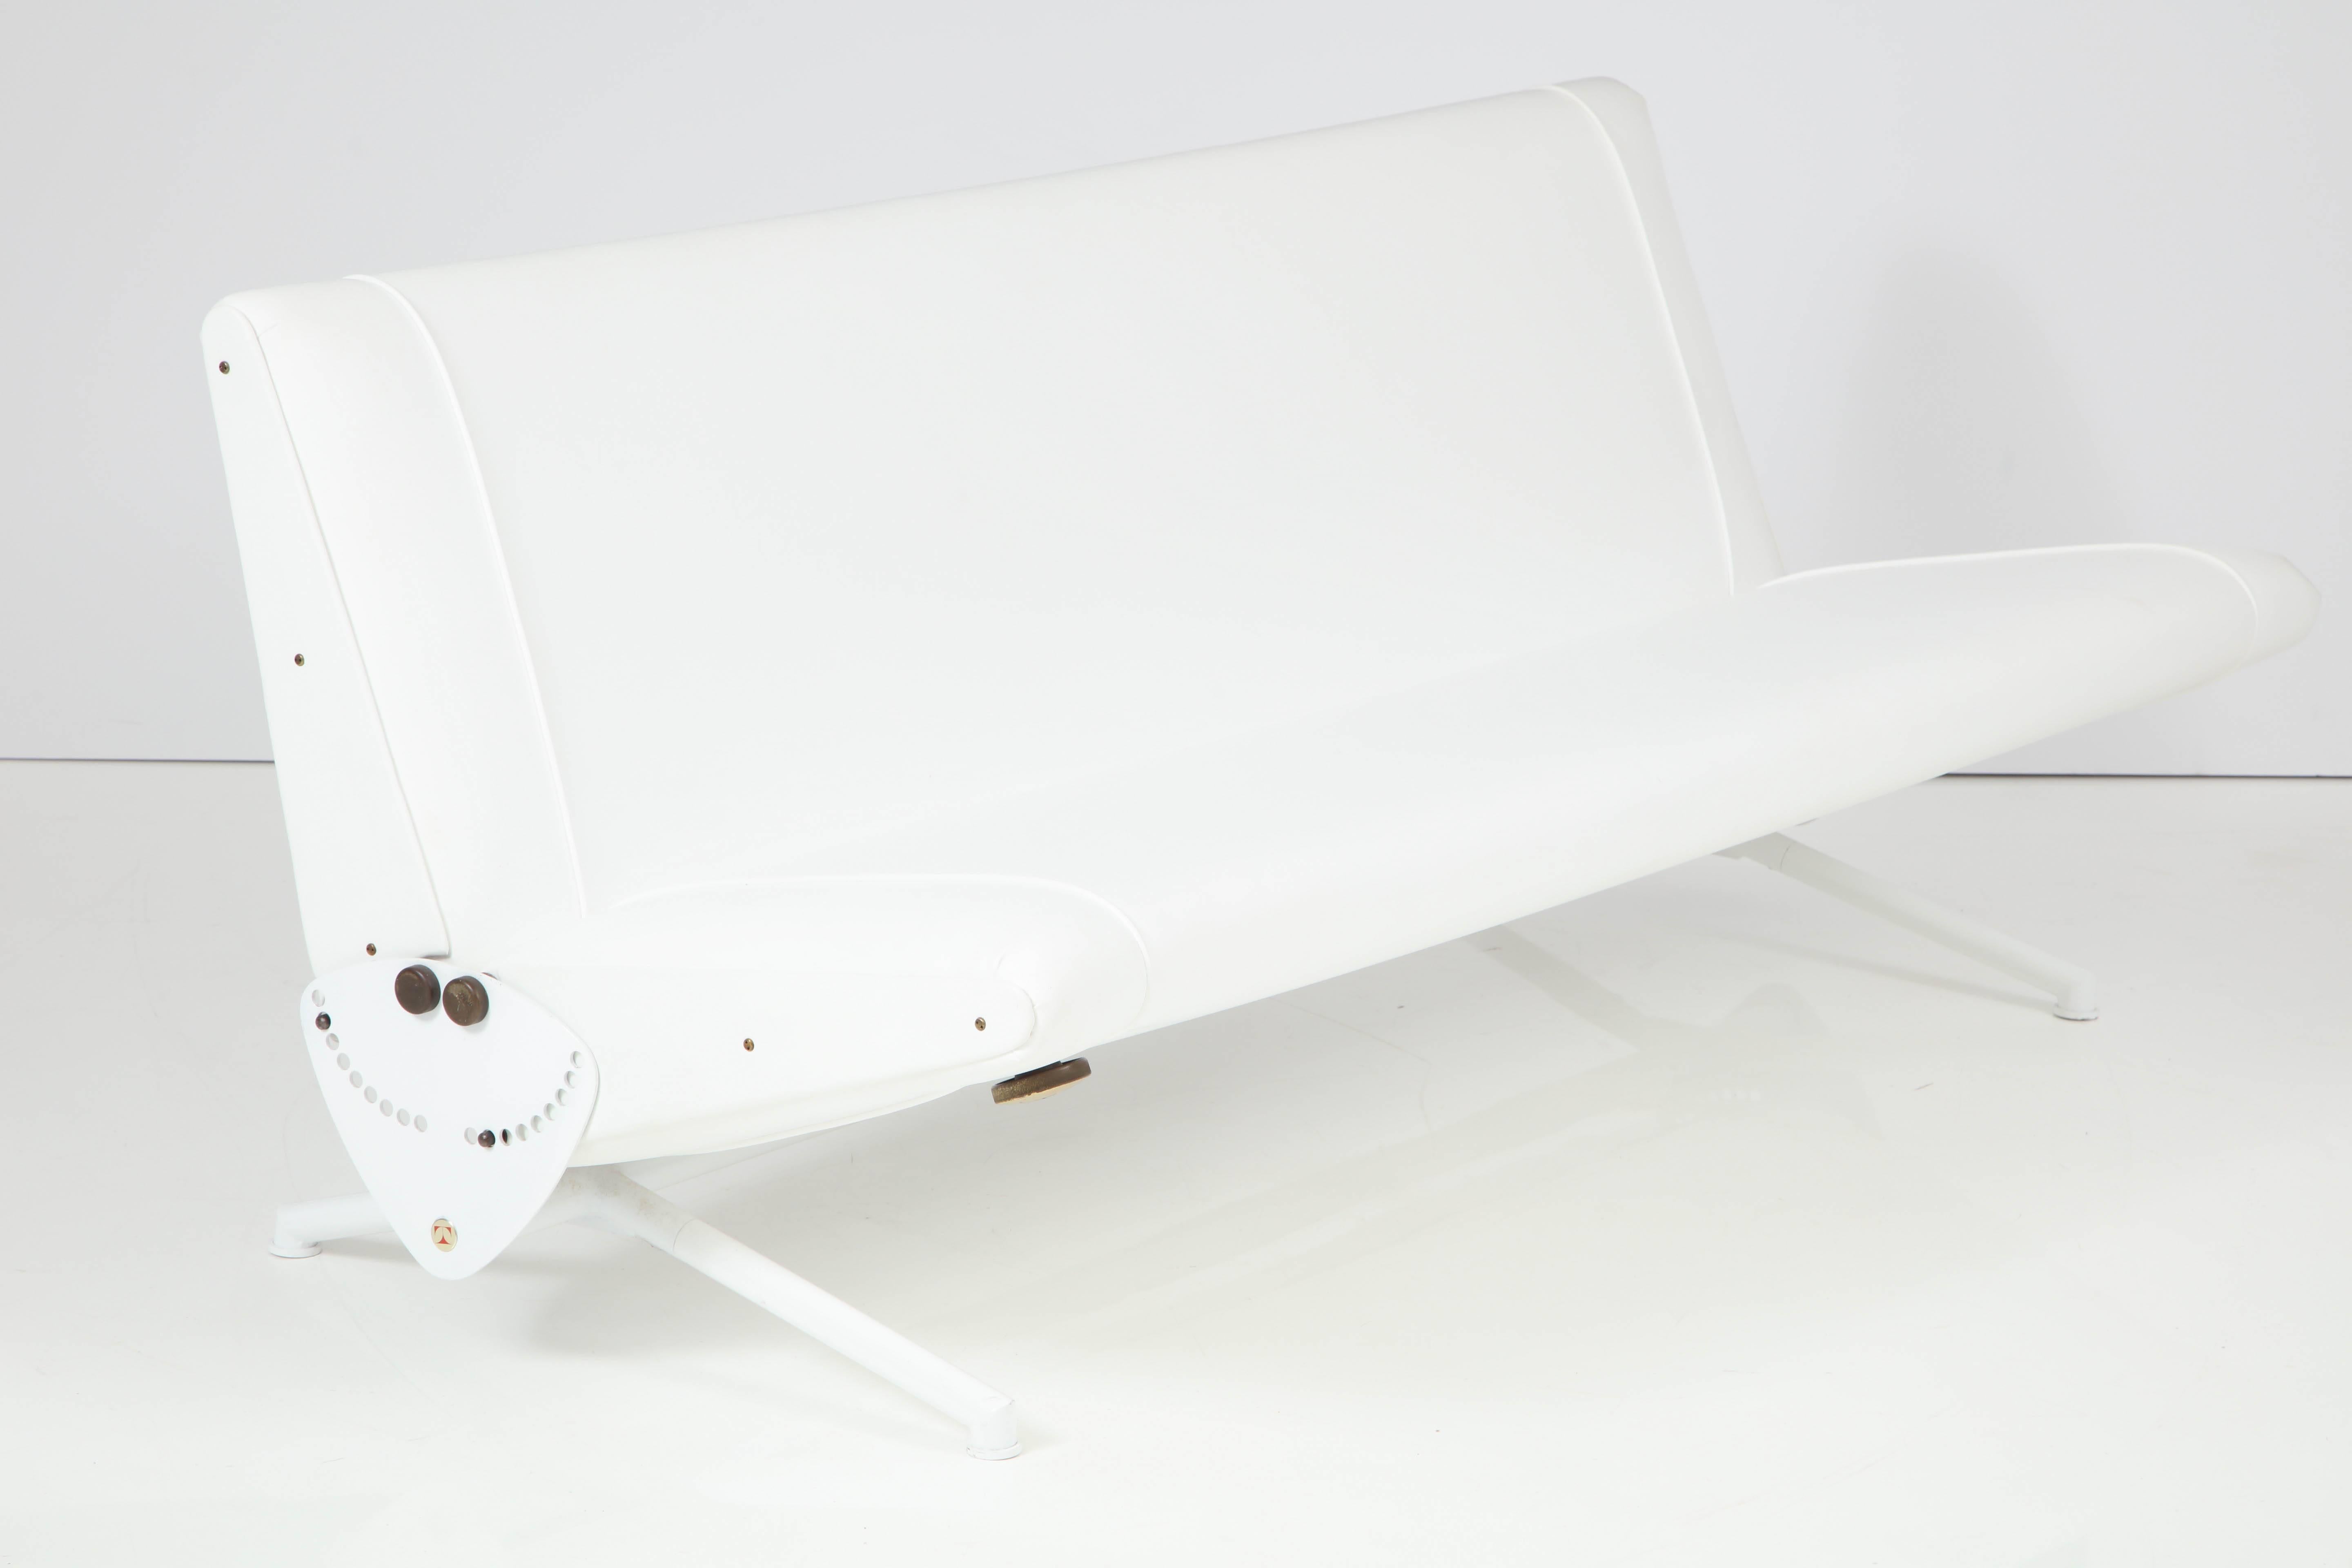 Early Borsani D70 sofa restored like the example found on the Borsani book cover, white on white. Fully adjustable, it opens into a bed. Two identical ones available. Inquire.